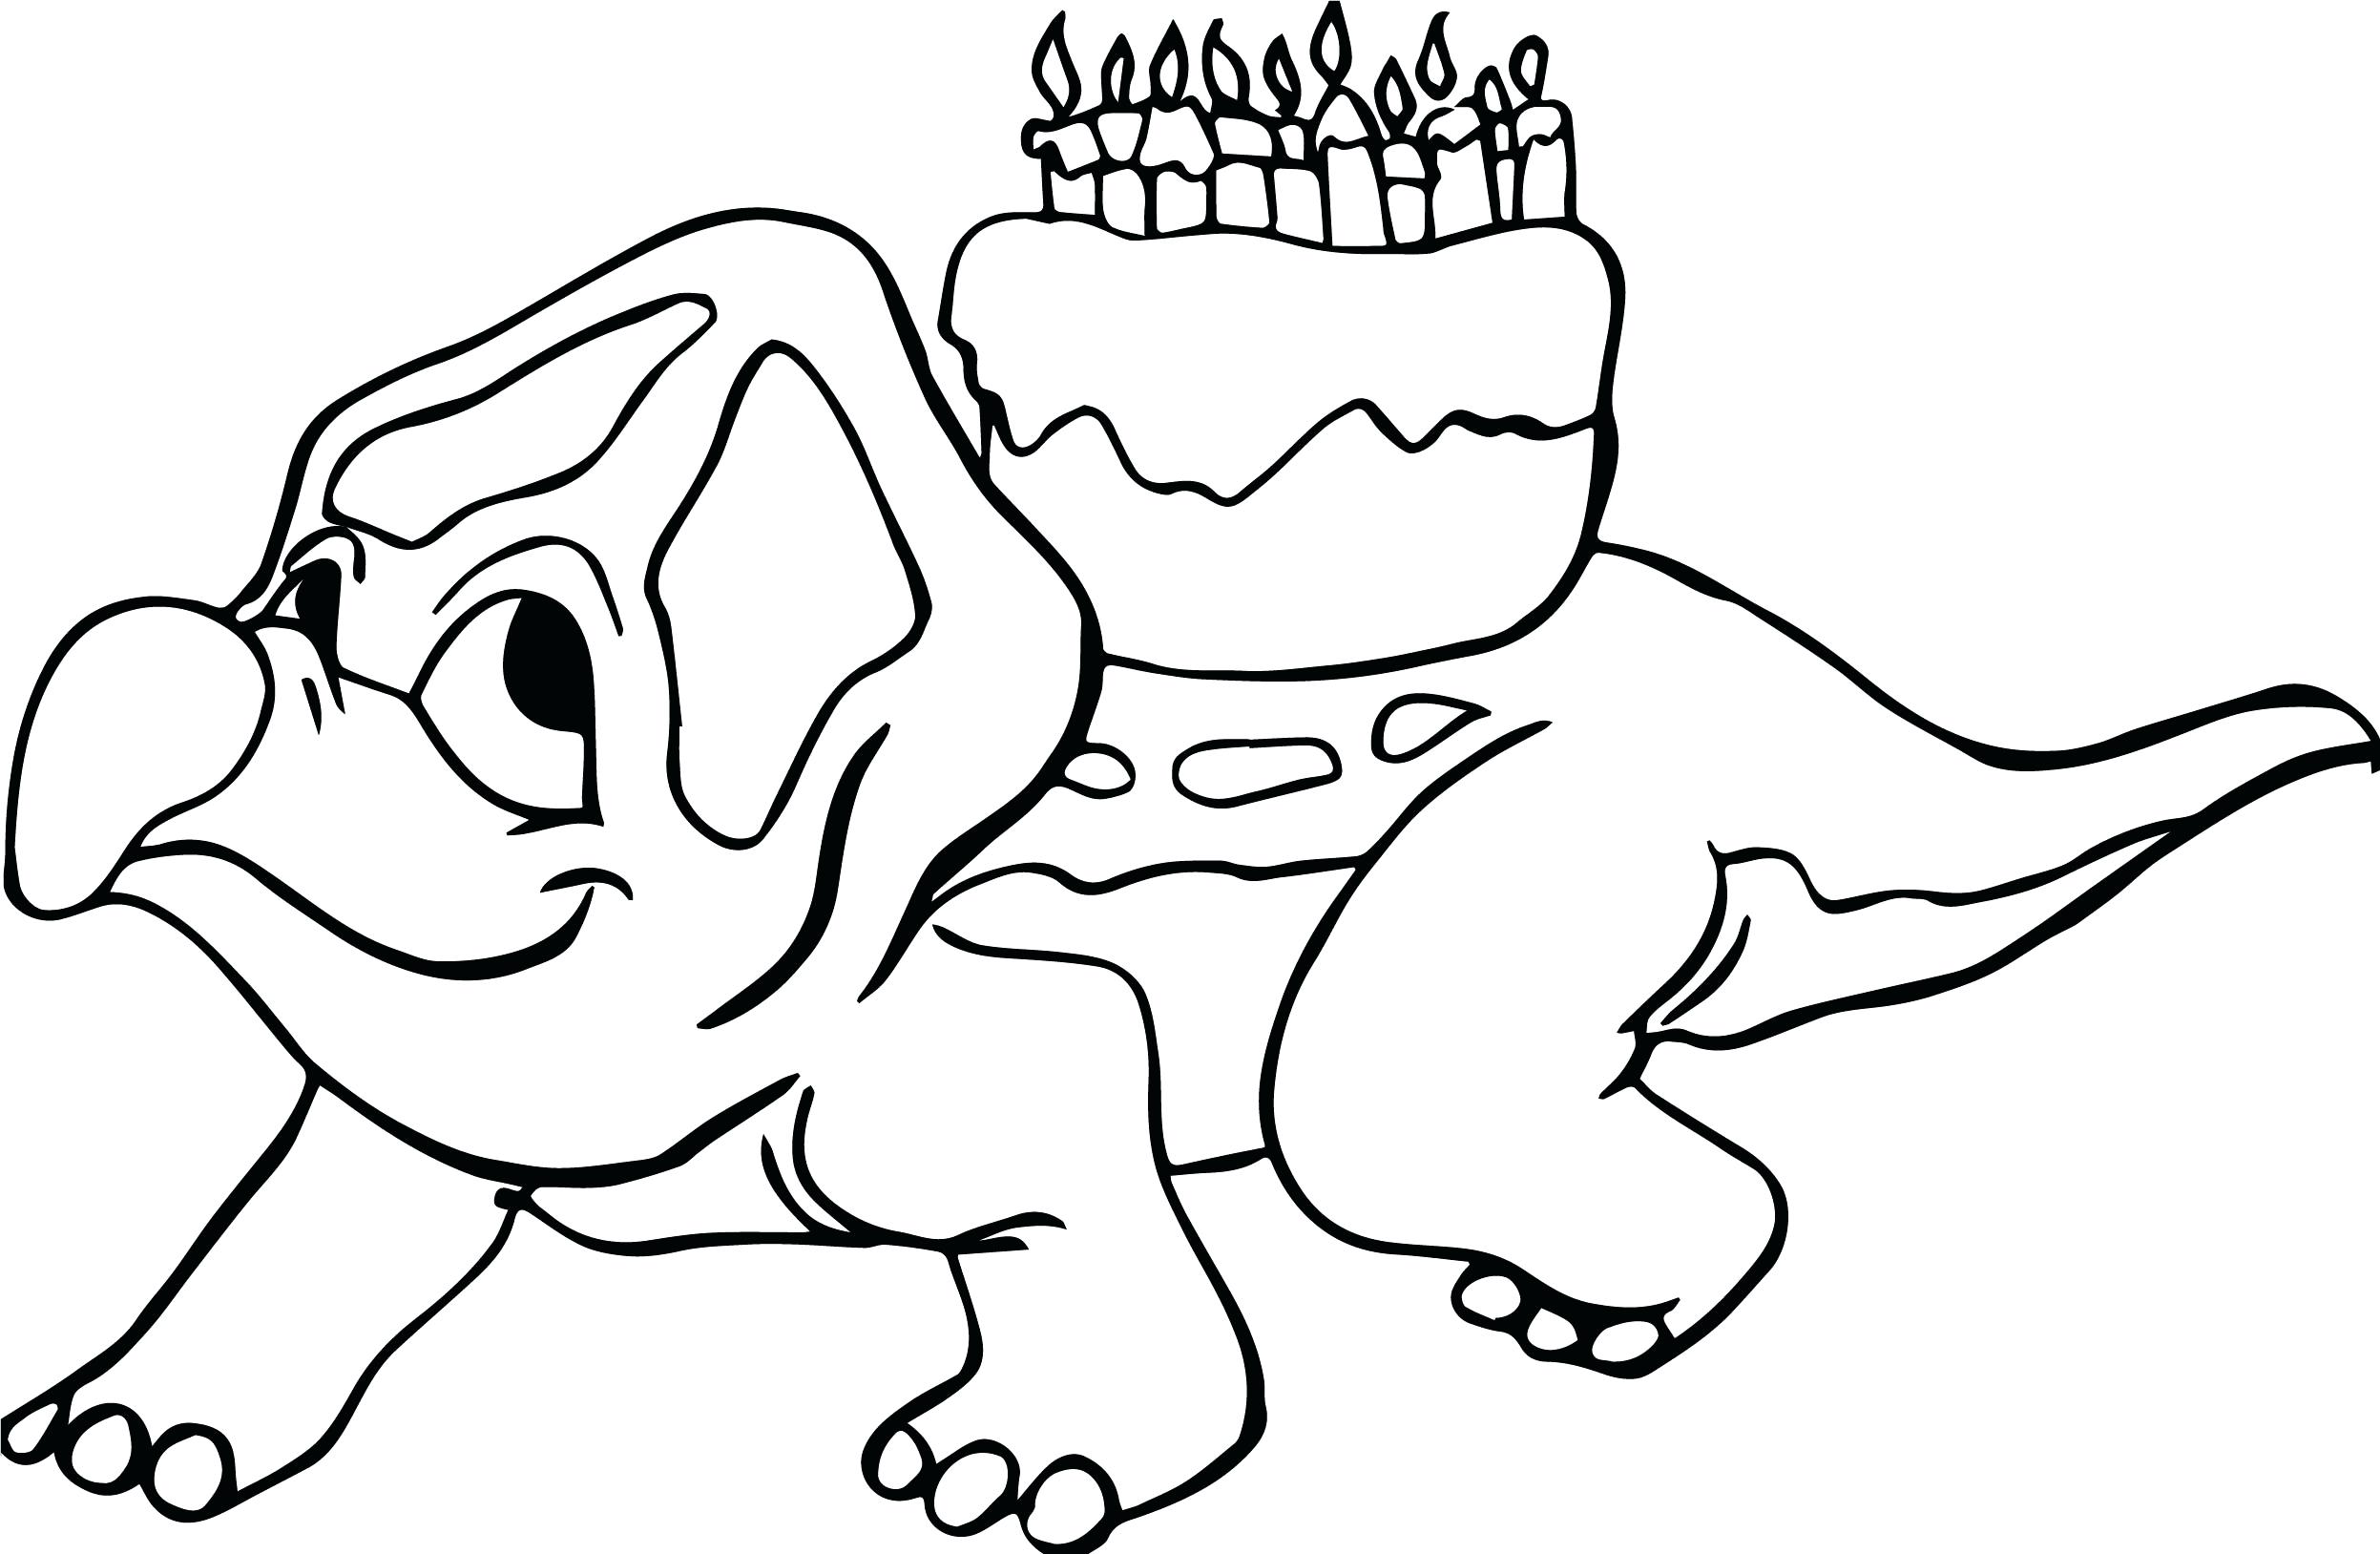 Dinosaur Birthday Coloring Pages at GetDrawings Free download